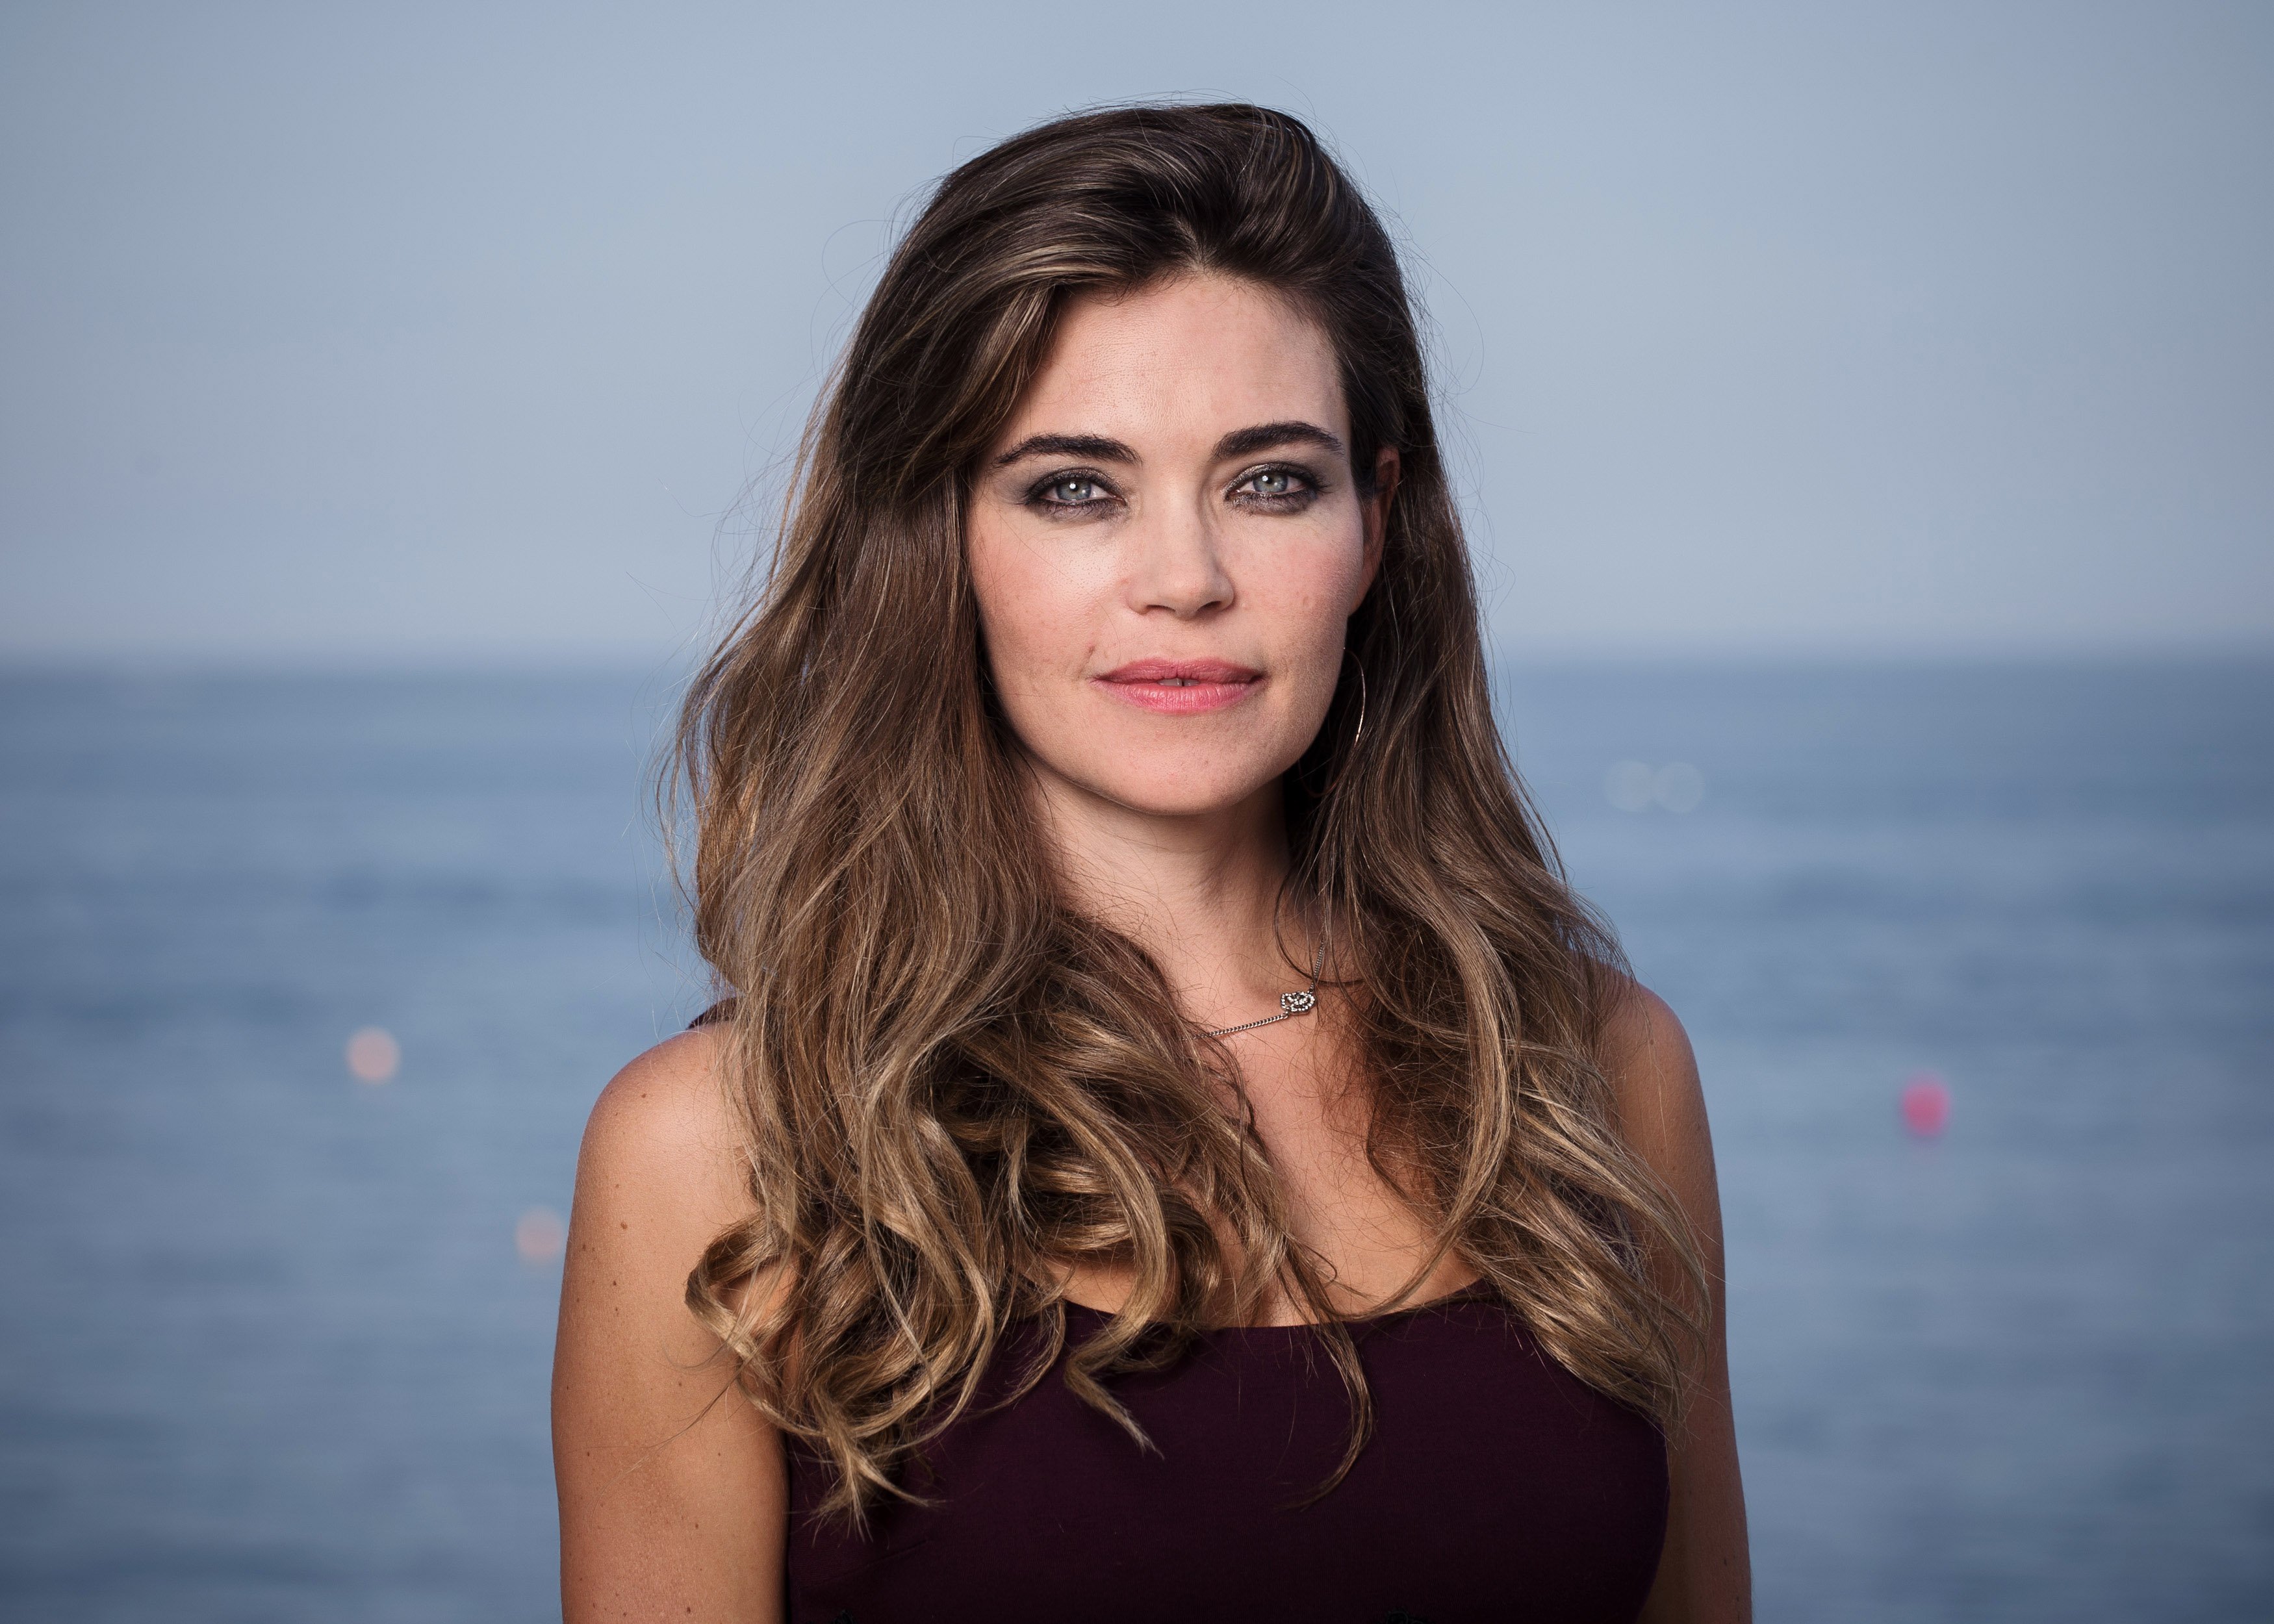 'The Young and the Restless' actor Amelia Heinle wearing a burgundy dress and posing in front of an ocean backdrop.